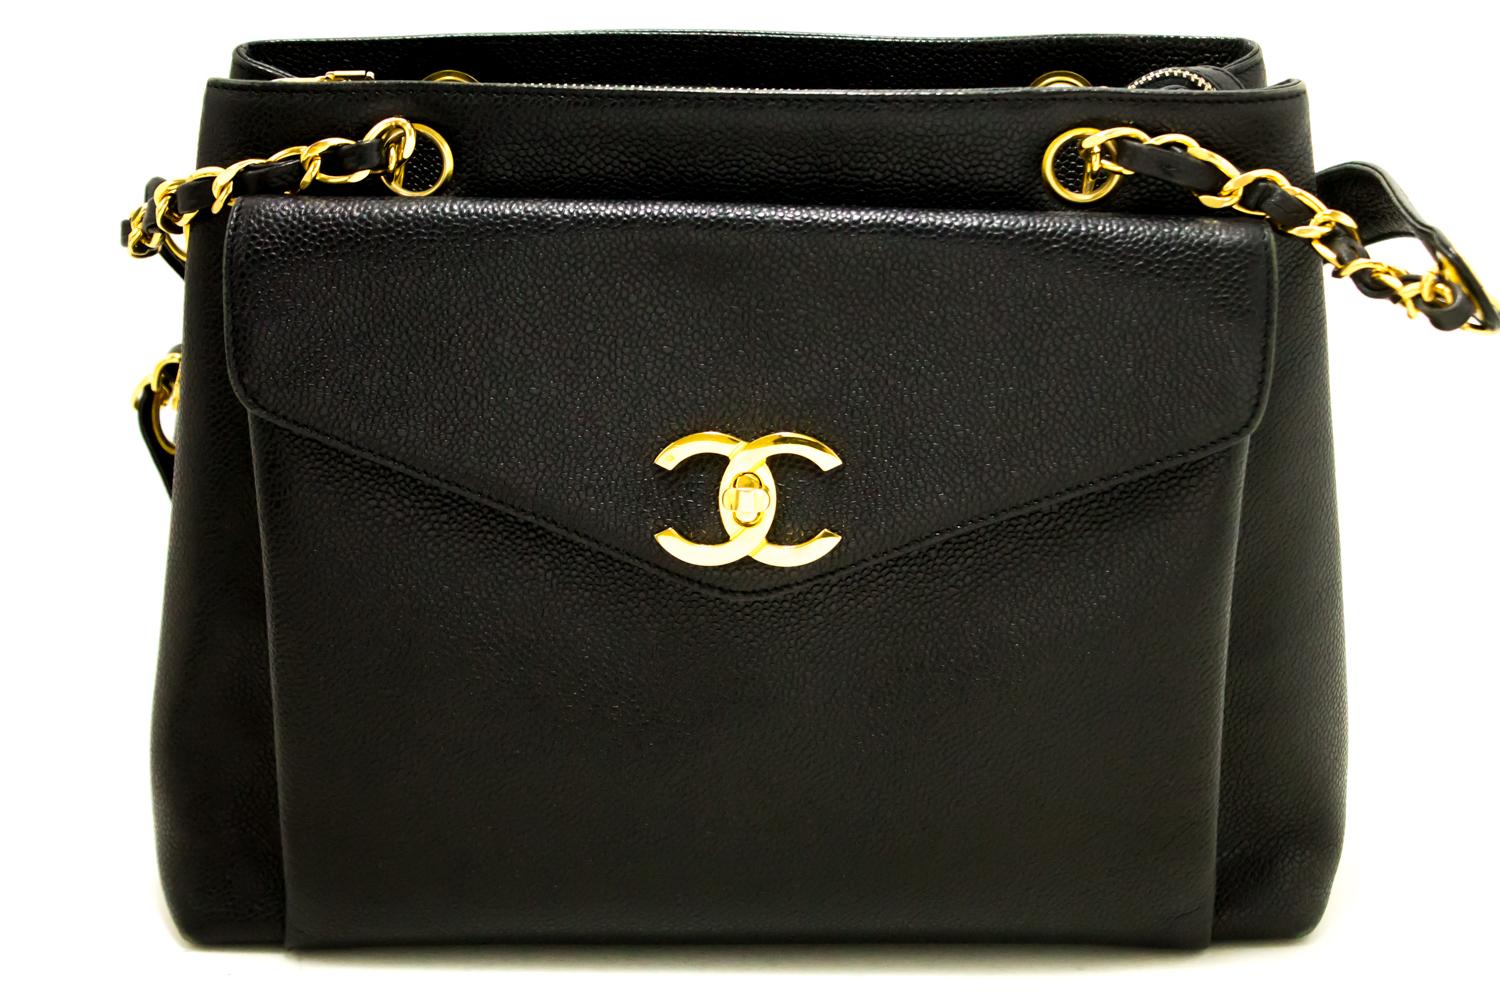 An authentic CHANEL Caviar Large Chain Shoulder Bag Black Leather Gold Zipper. The color is Black. The outside material is Leather. The pattern is Solid.
Conditions & Ratings
Outside material: Caviar leather
Color: Black
Closure: Zipper
Hardware and